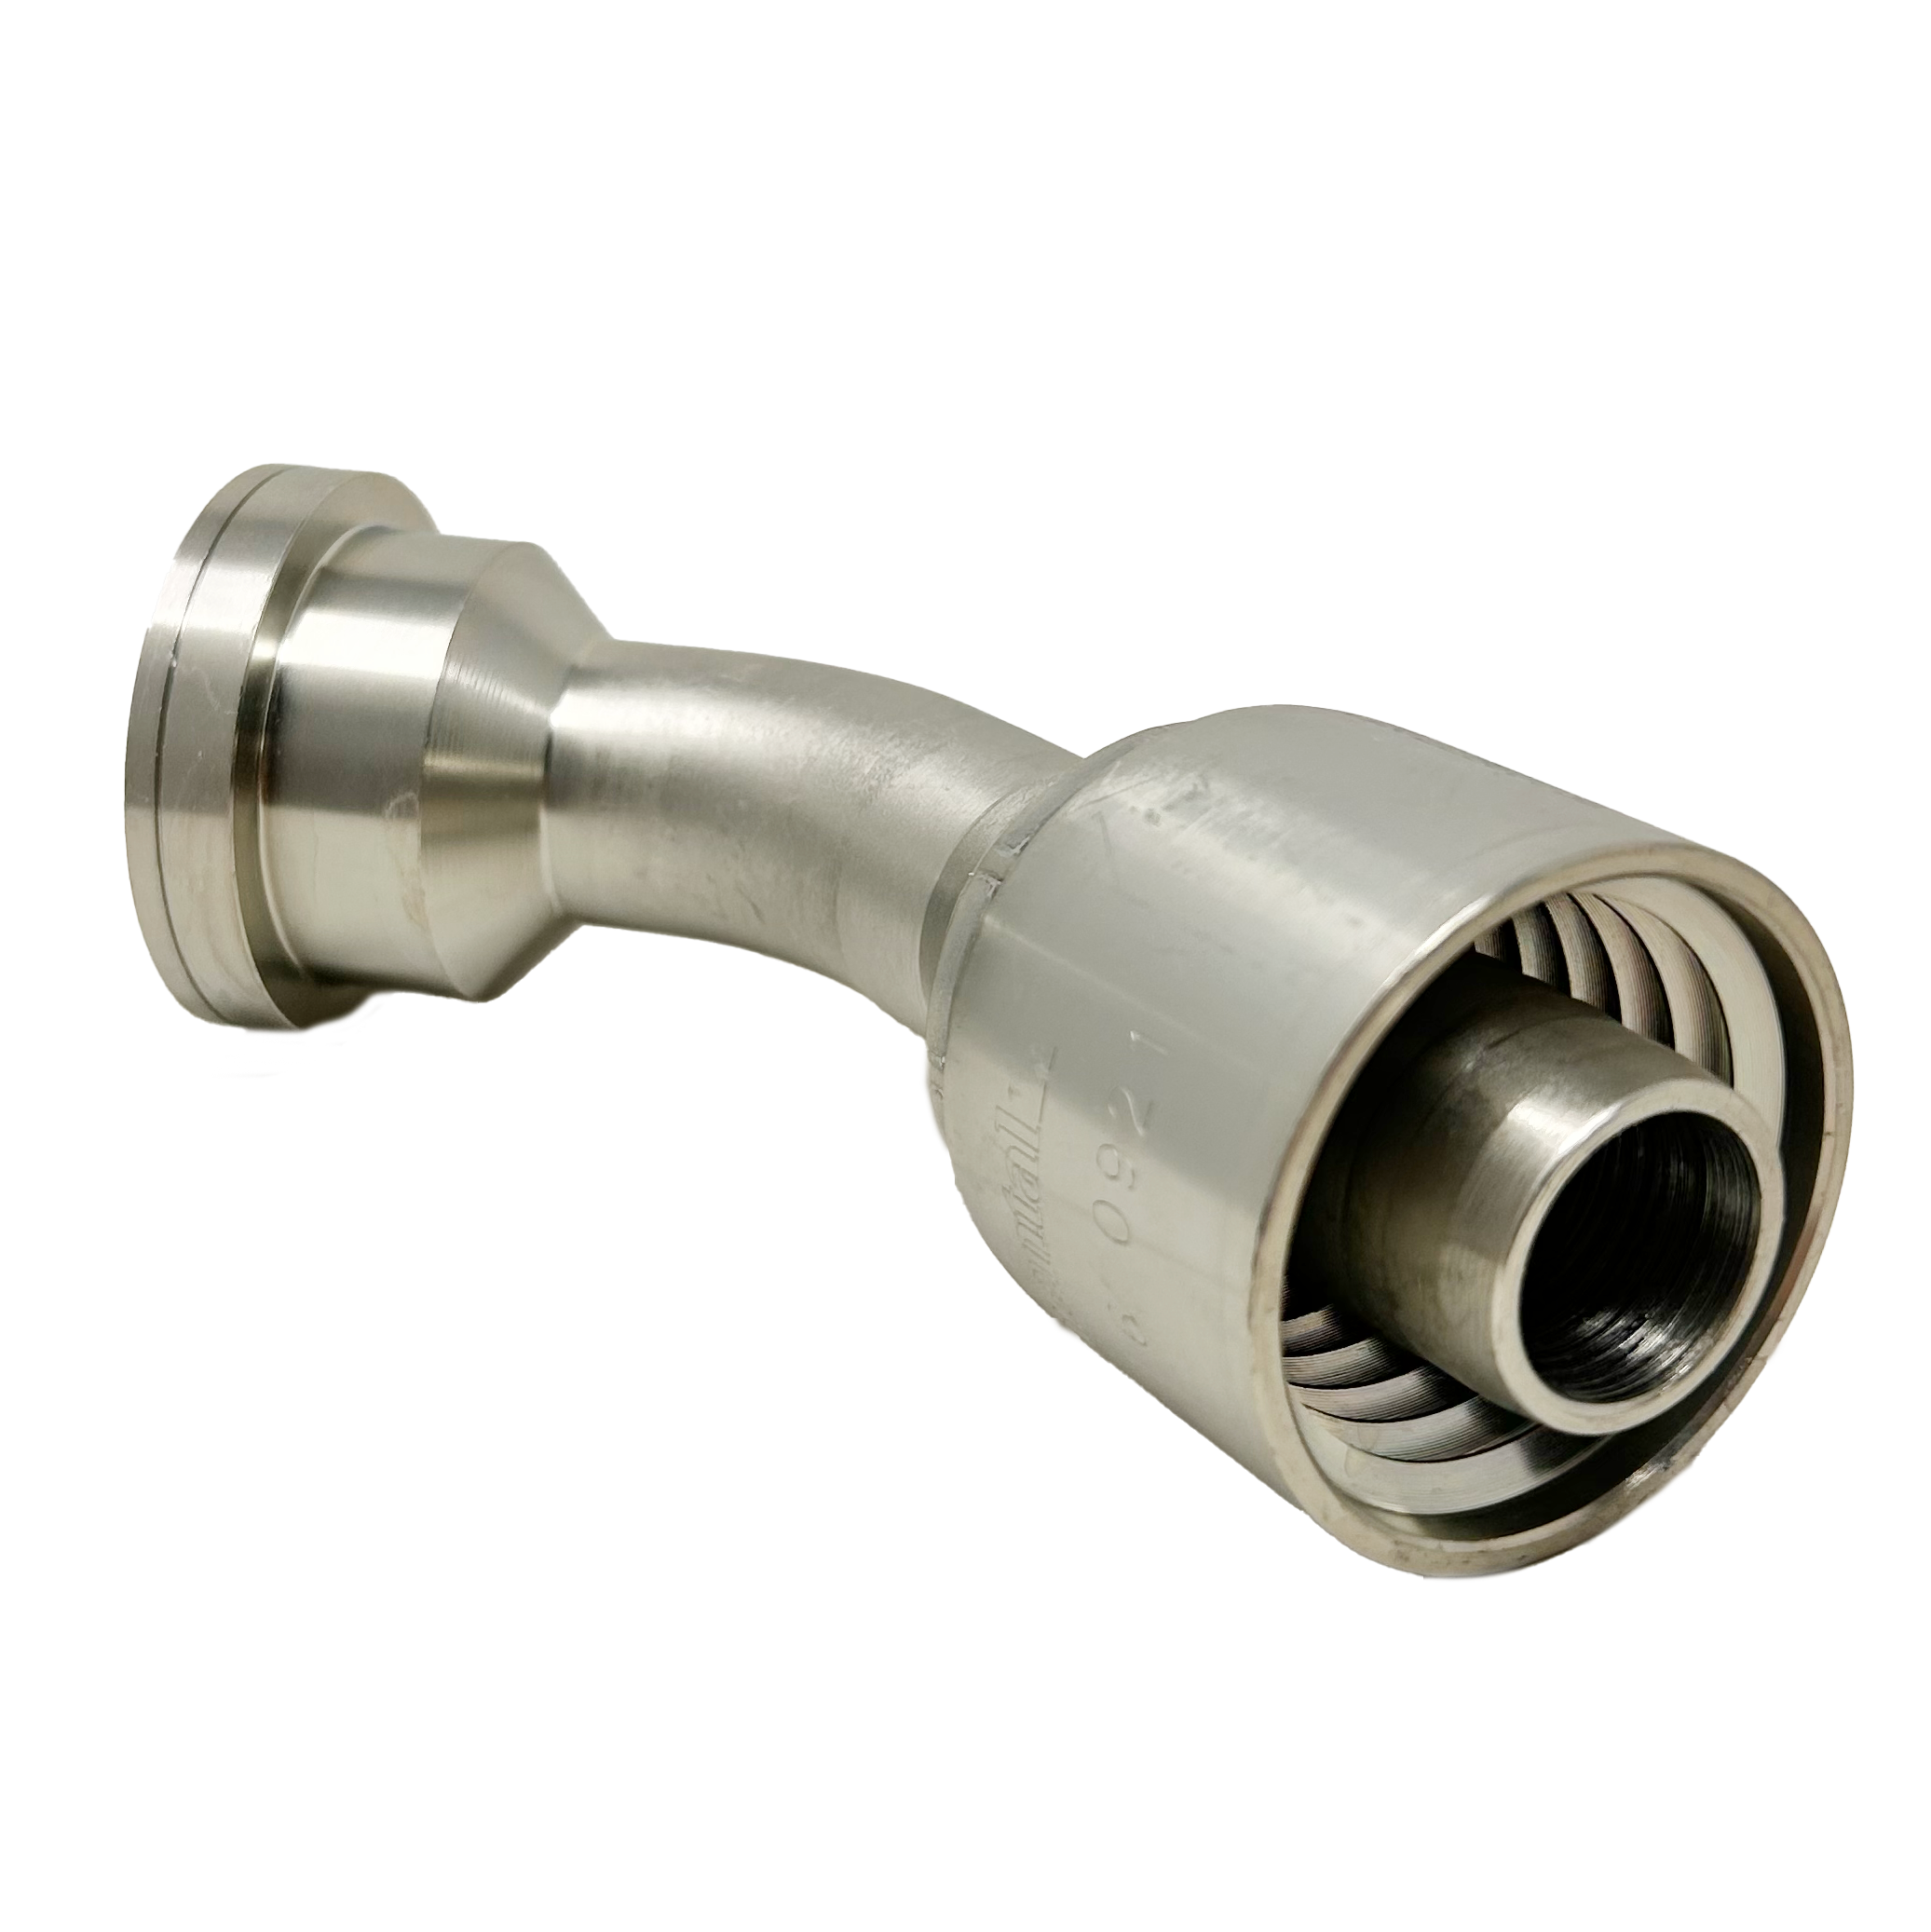 B2-FH45-1620: Continental Hose Fitting, 1" Hose ID x 1.25 (1-1/4") Code 62, 45-Degree Connection